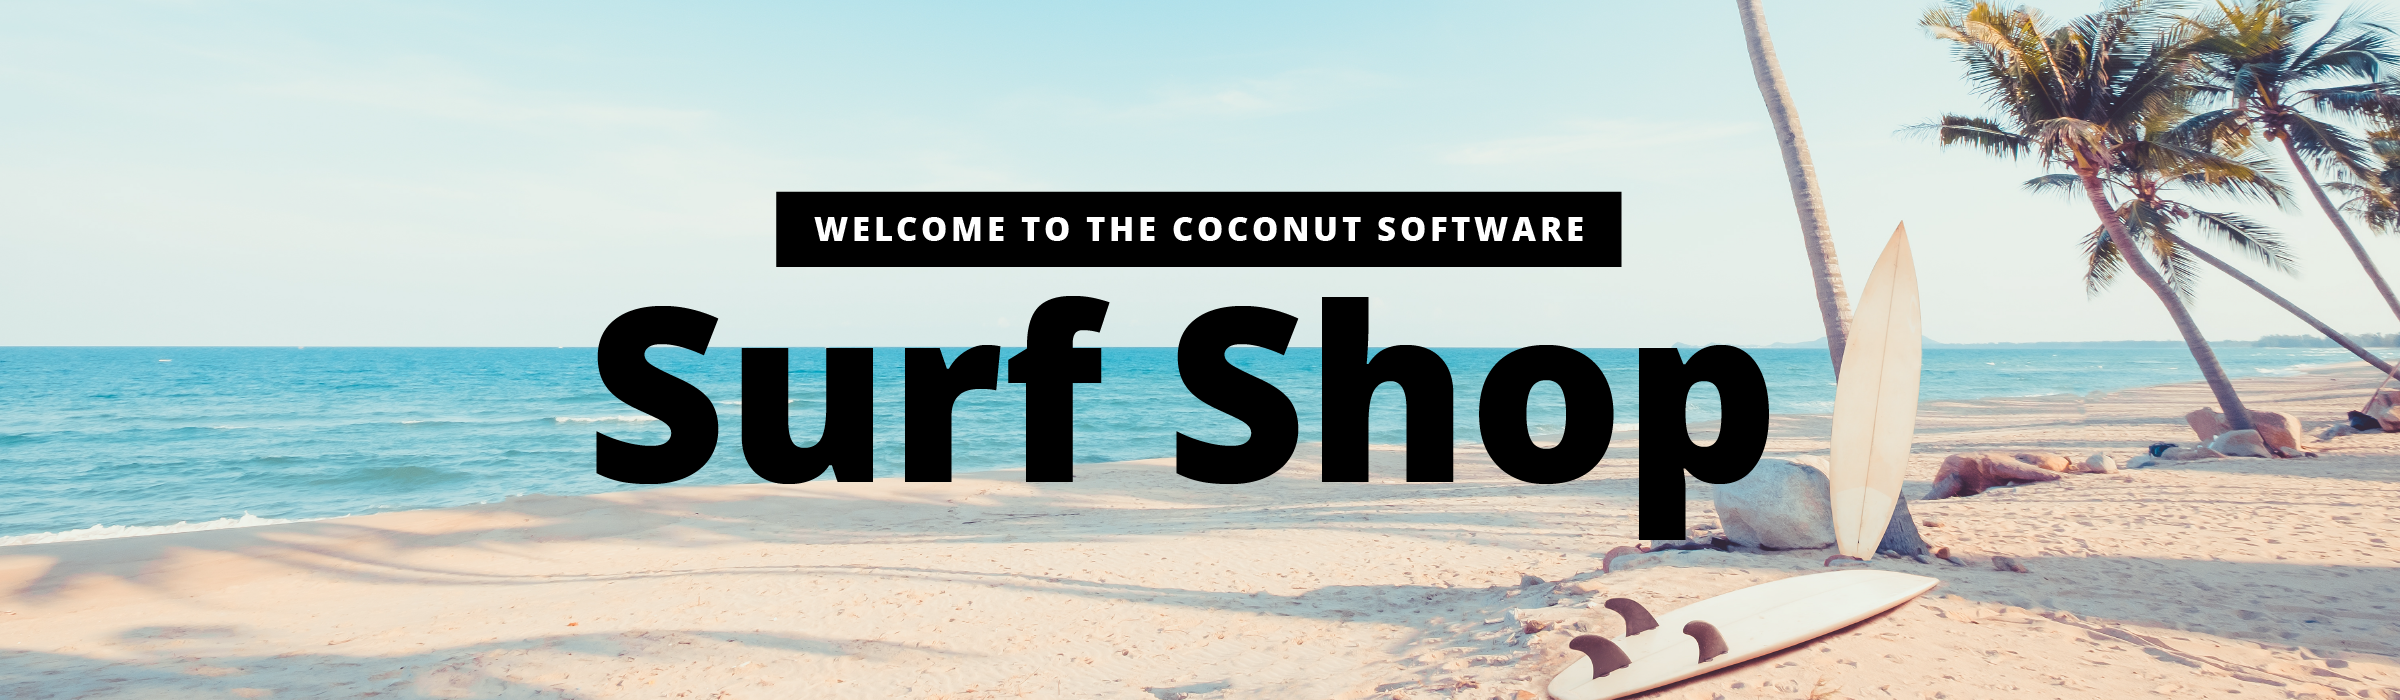 Welcome to the Coconut Software Surf Shop